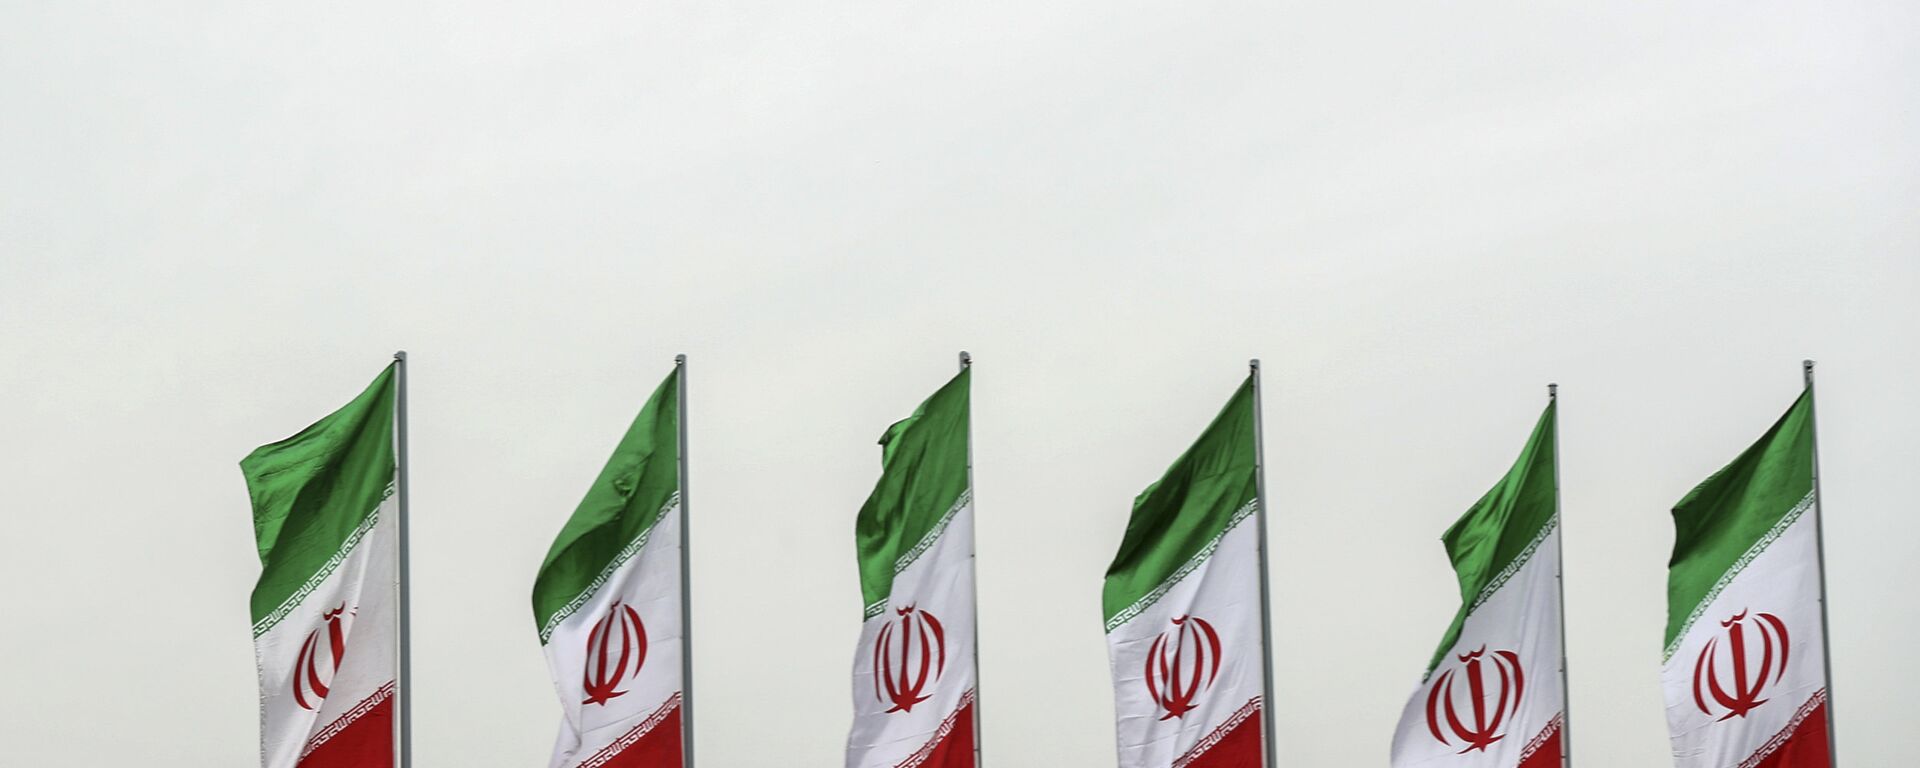 In this photo released by the official website of the office of the Iranian Presidency, a fighter jet flies over Iranian flags during the army parade commemorating National Army Day in front of the shrine of the late revolutionary founder Ayatollah Khomeini, just outside Tehran, Iran, Thursday, April 18, 2019 - Sputnik International, 1920, 06.10.2022